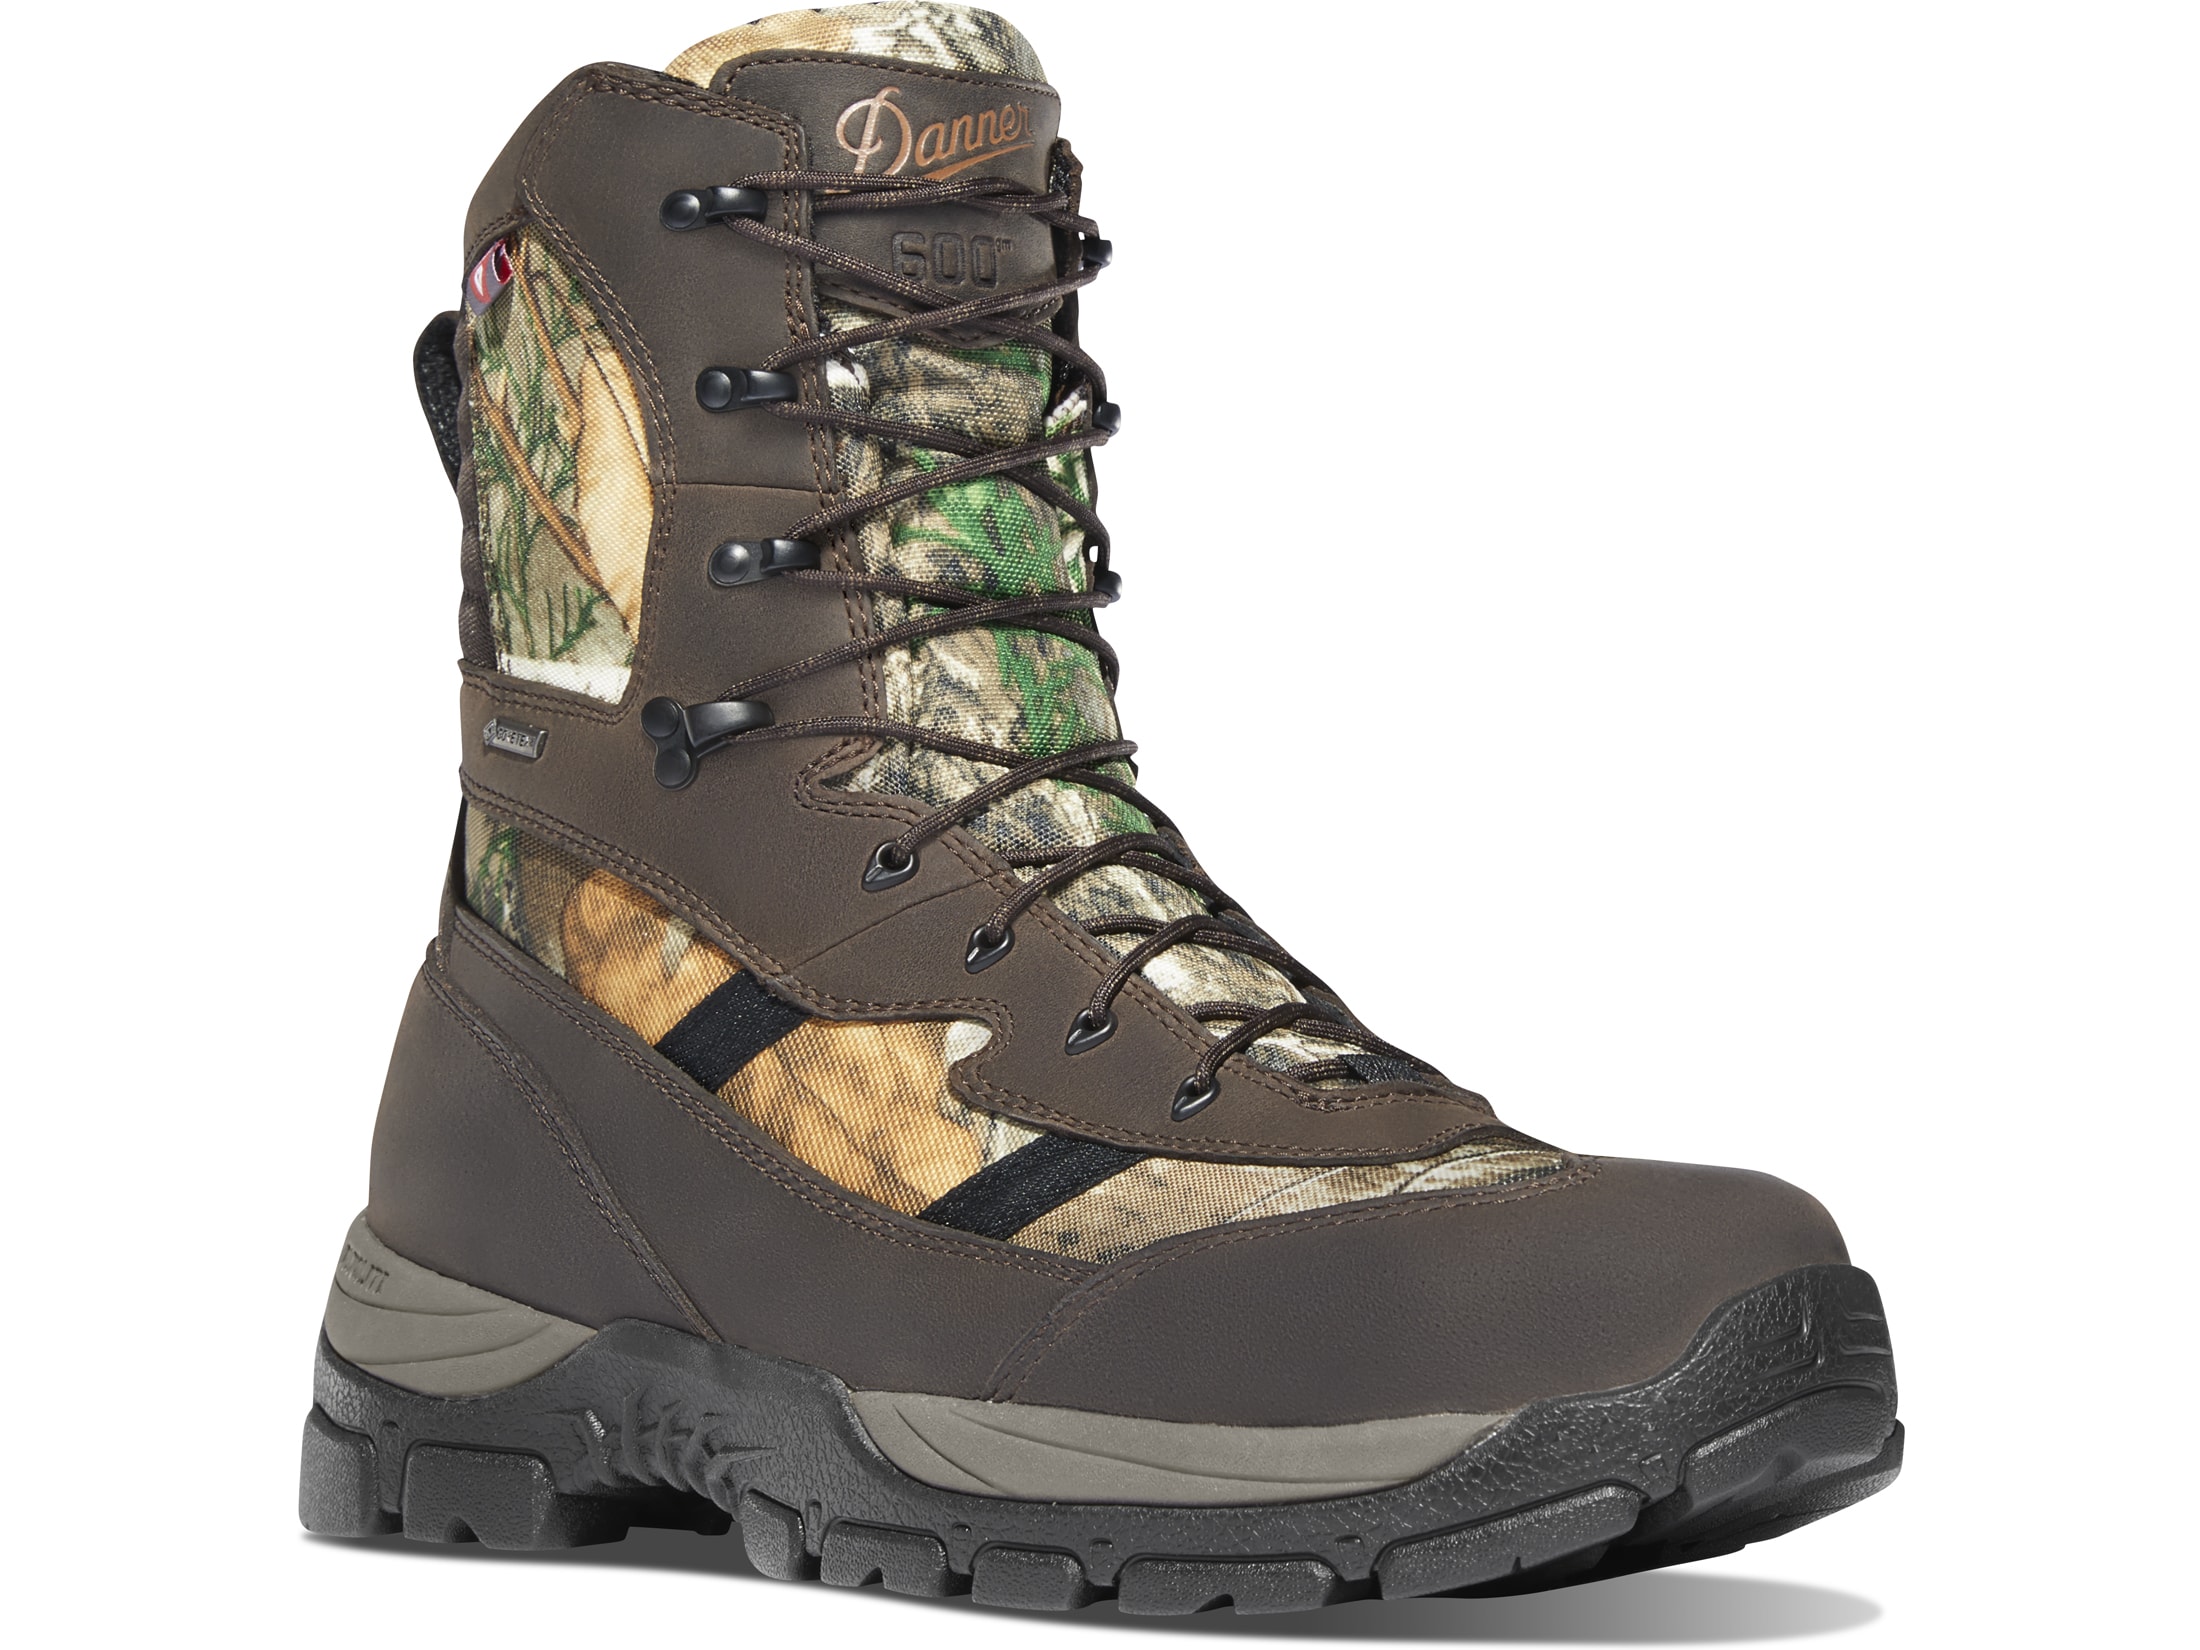 Danner Alsea 8 600 Gram Insulated Hunting Boots Leather/Synthetic